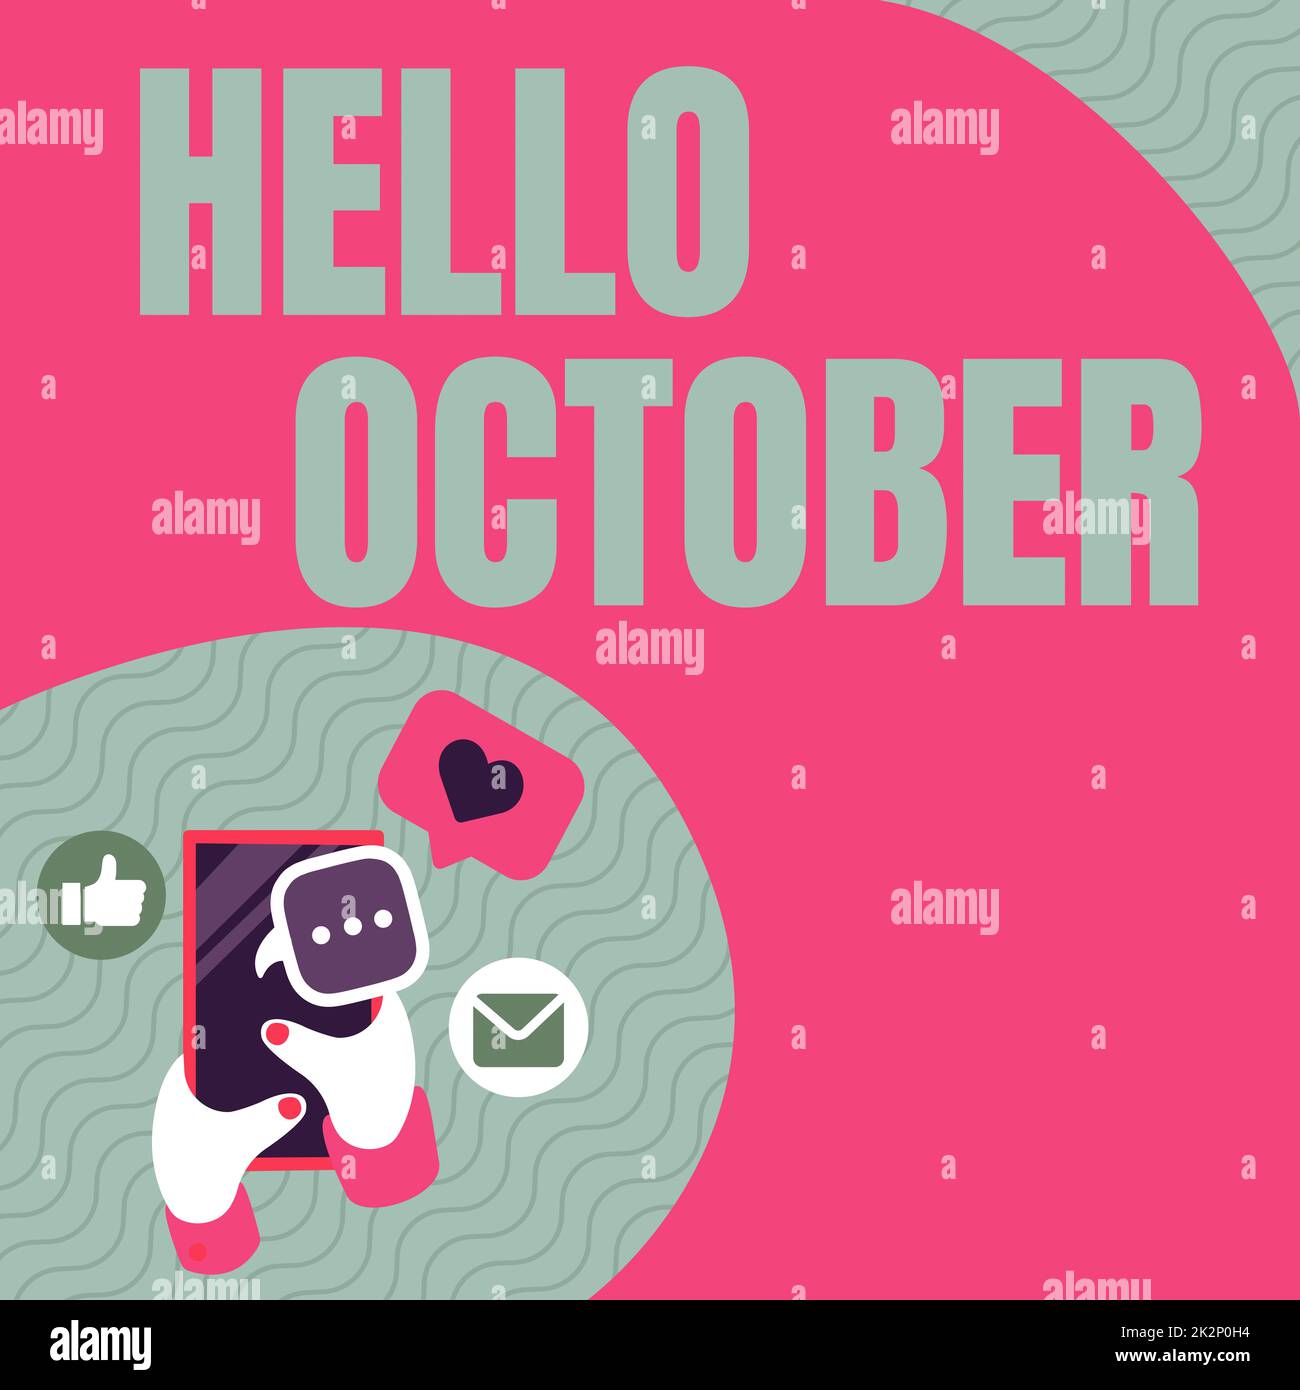 Writing displaying text Hello October, Business showcase Last Quarter Tenth Month 30days Season Greeting Hand Holding Mobile Phone Pressing Applicatio Stock Photo